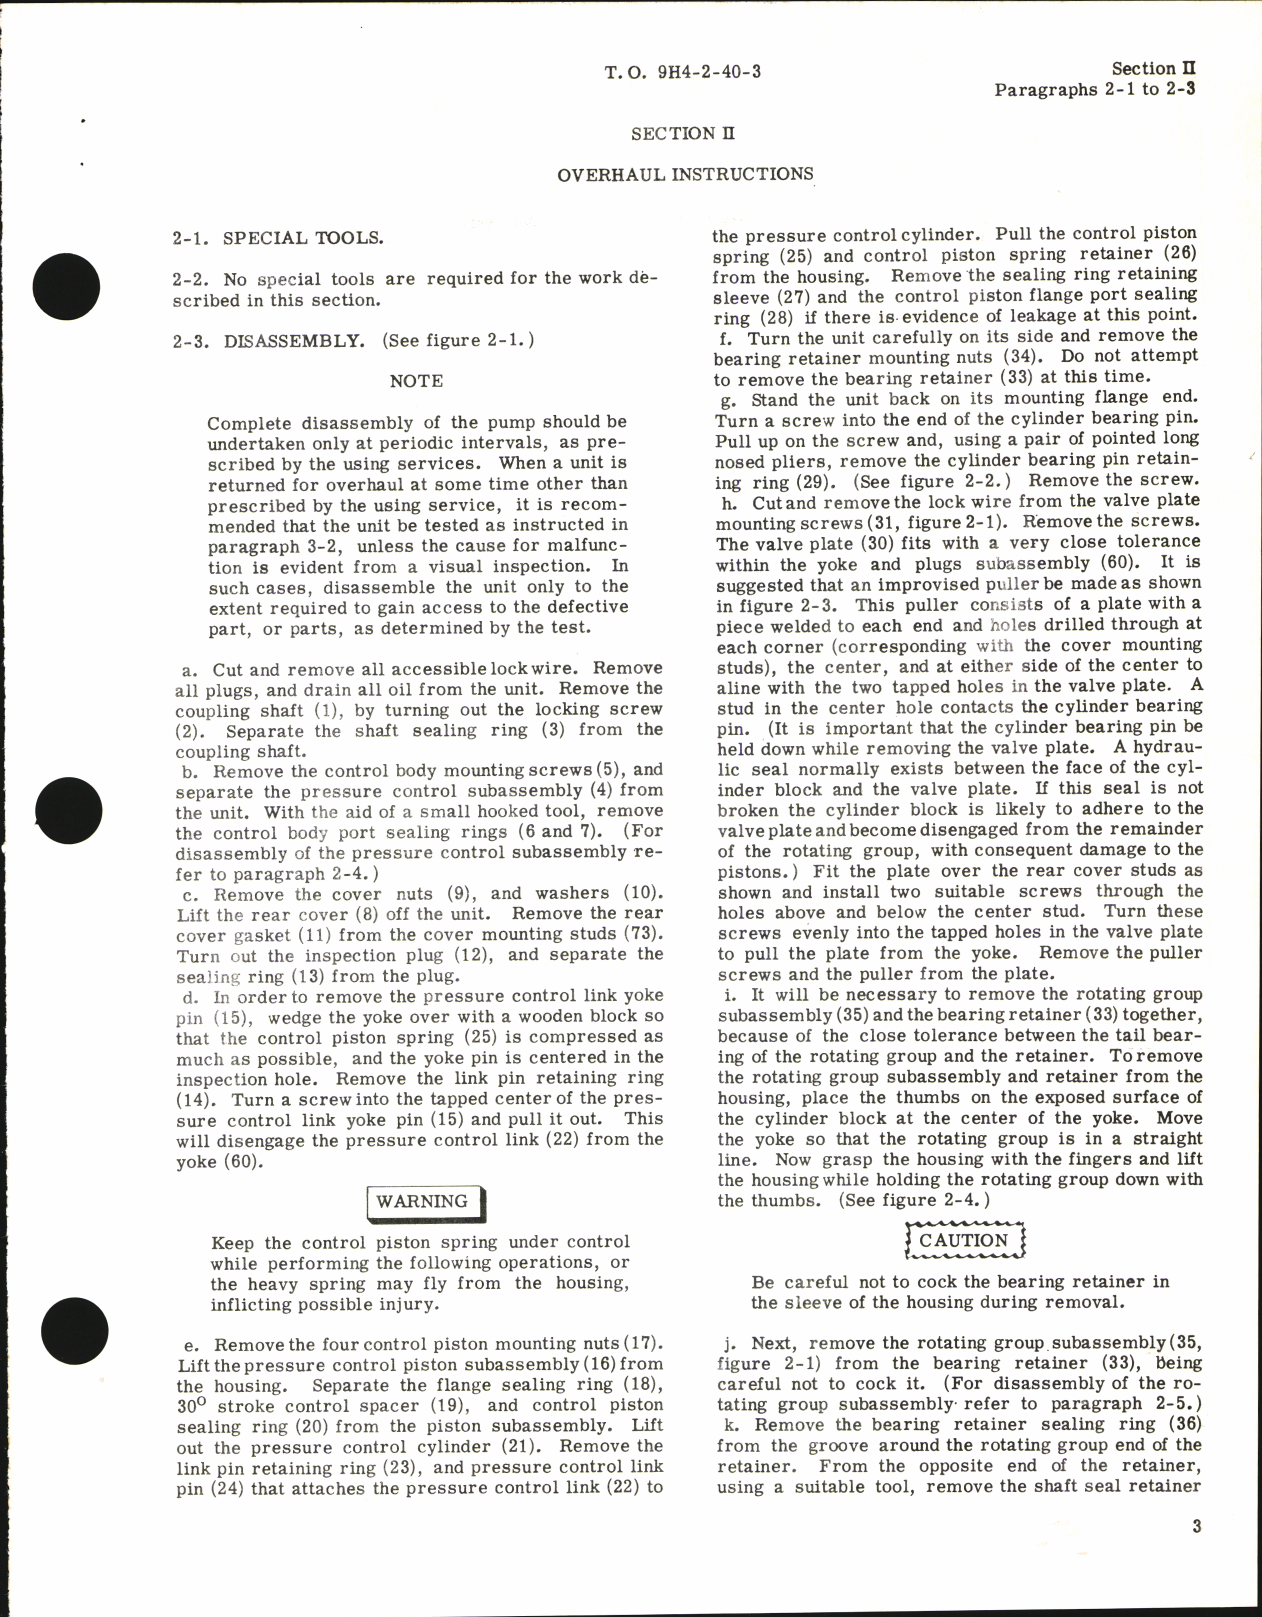 Sample page 7 from AirCorps Library document: Overhaul Instructions for Variable Displacement Hydraulic Pumps AA-60550-L Series